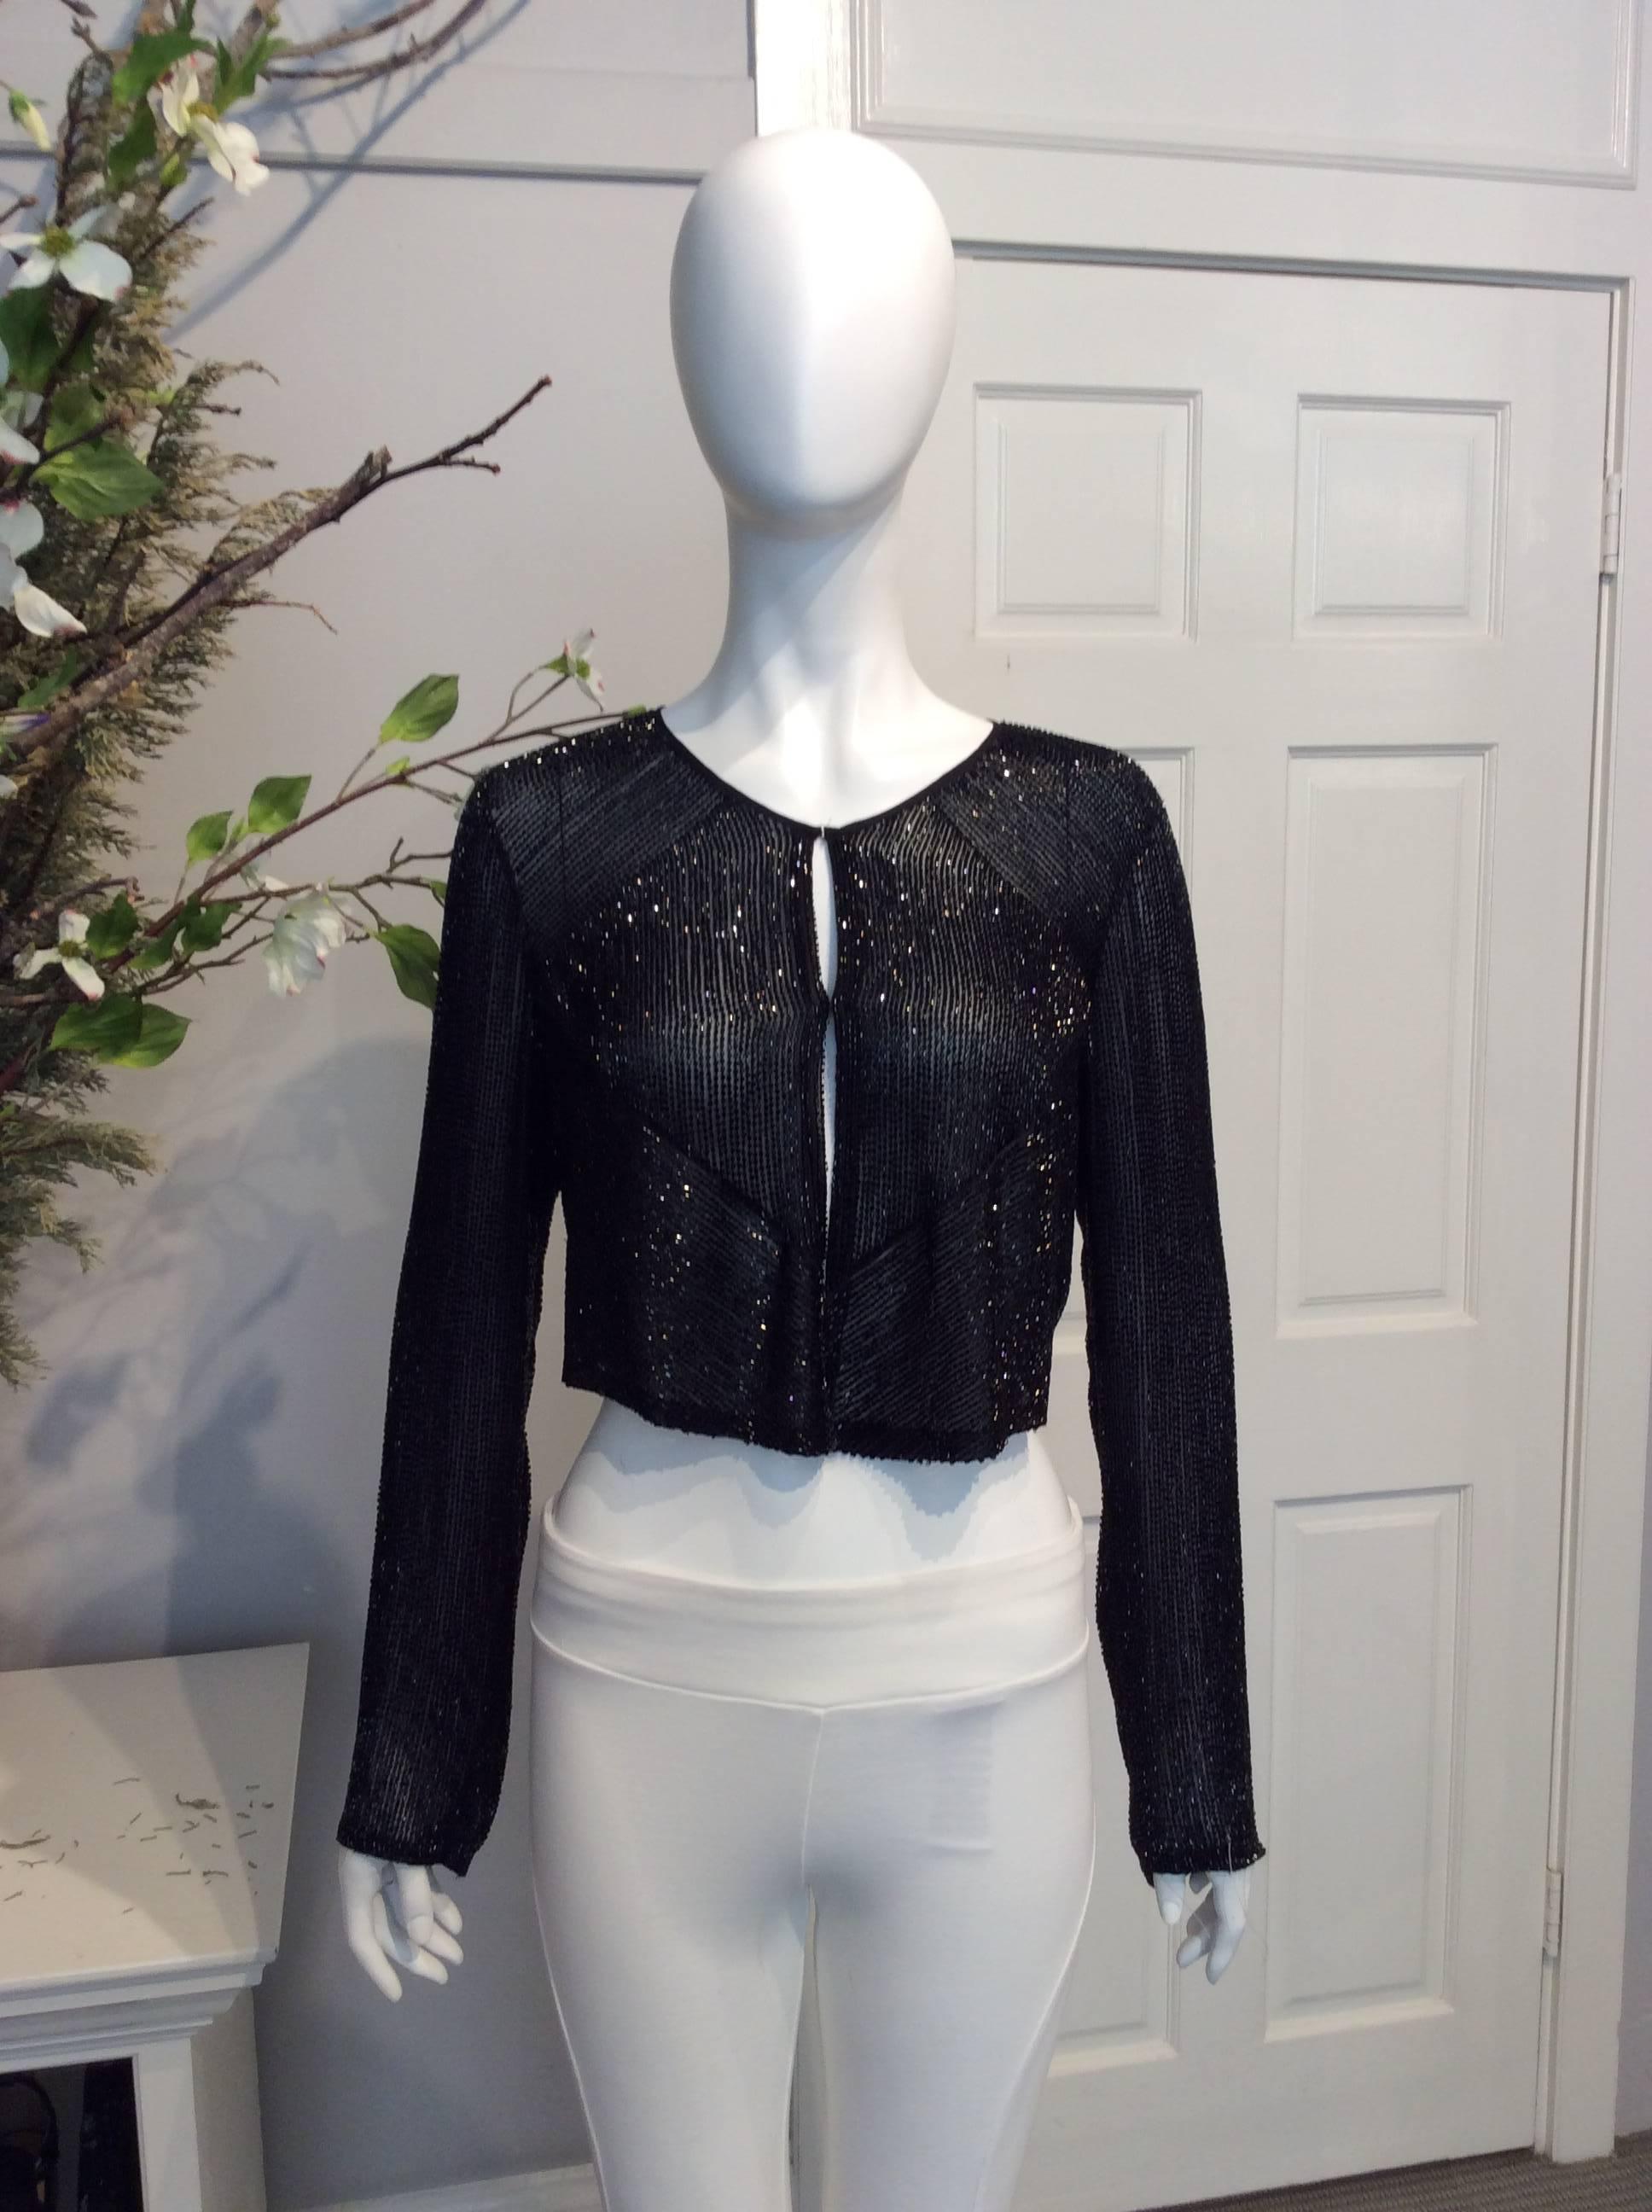 Chloe black beaded silk cropped evening jacket. Jewel neckline. Triangular beaded pattern at chest. Beading throughout entire piece.

Sizing: Fr36, Us4

Fabric content: 100% Silk